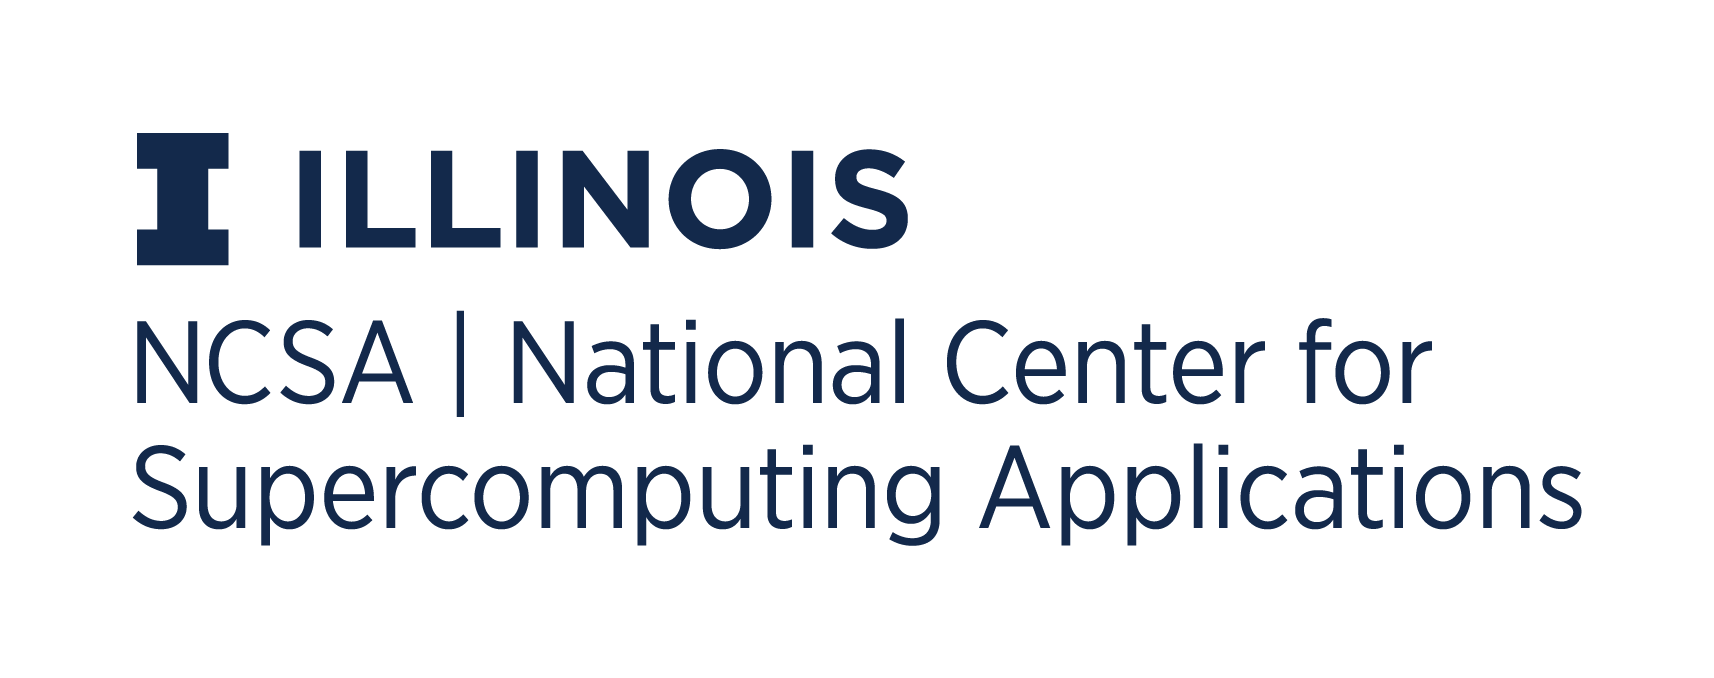 National Center for Supercomputing Applications